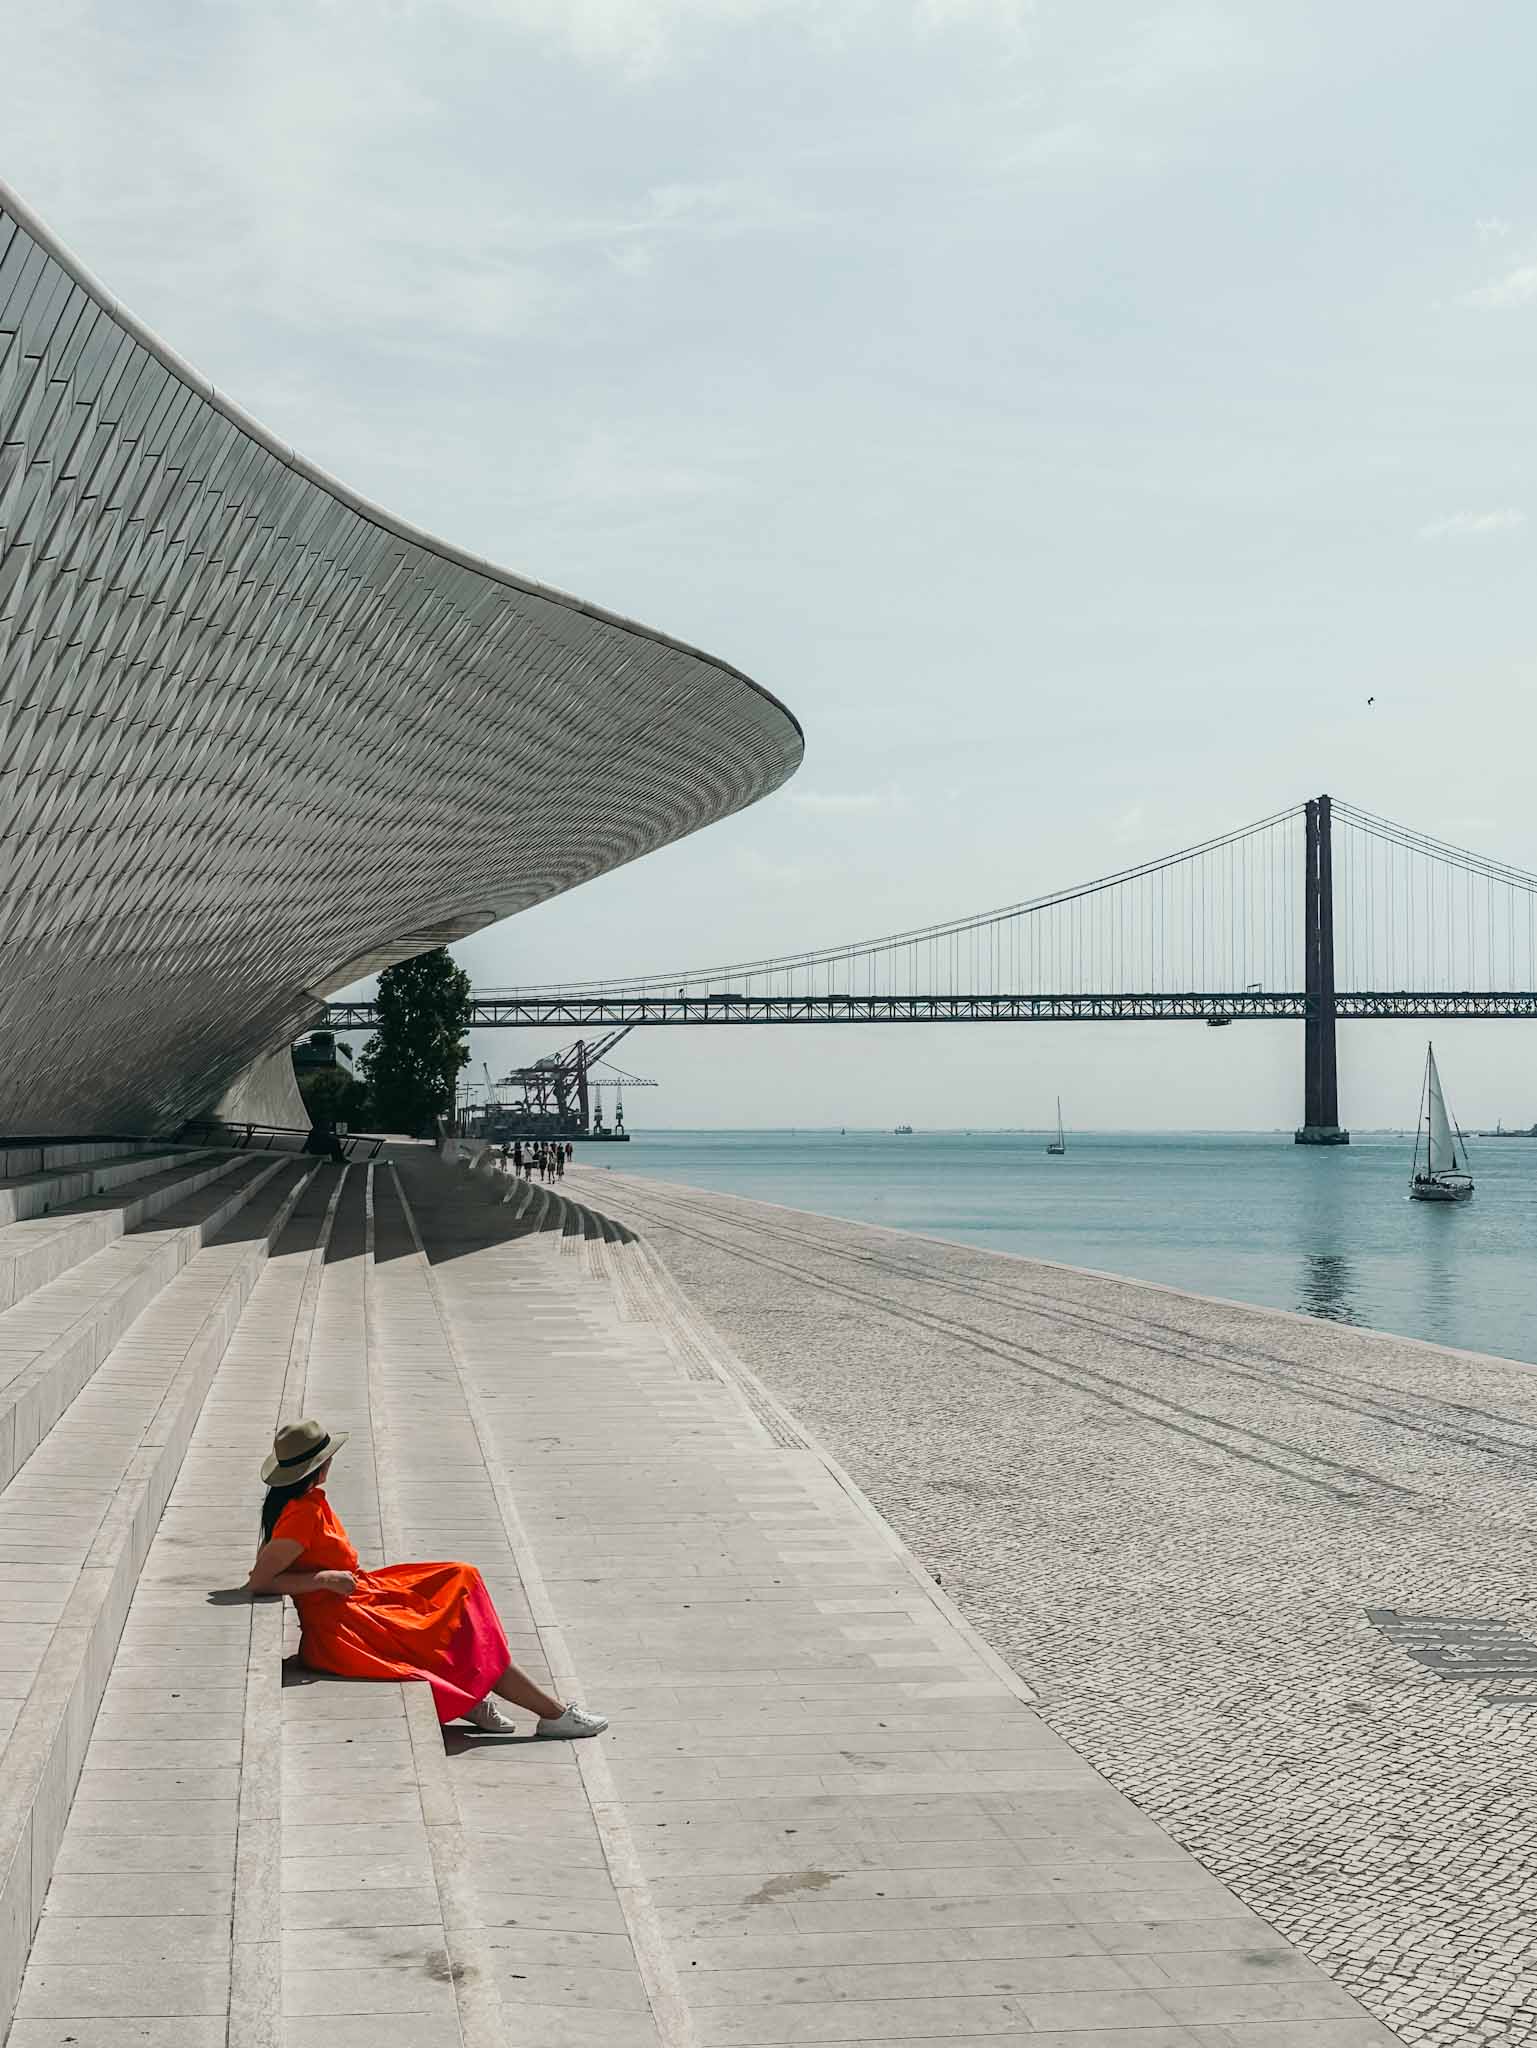 Best Instagram photo spots in Lisbon, Portugal - MAAT - Museum of Art, Architecture and Technology